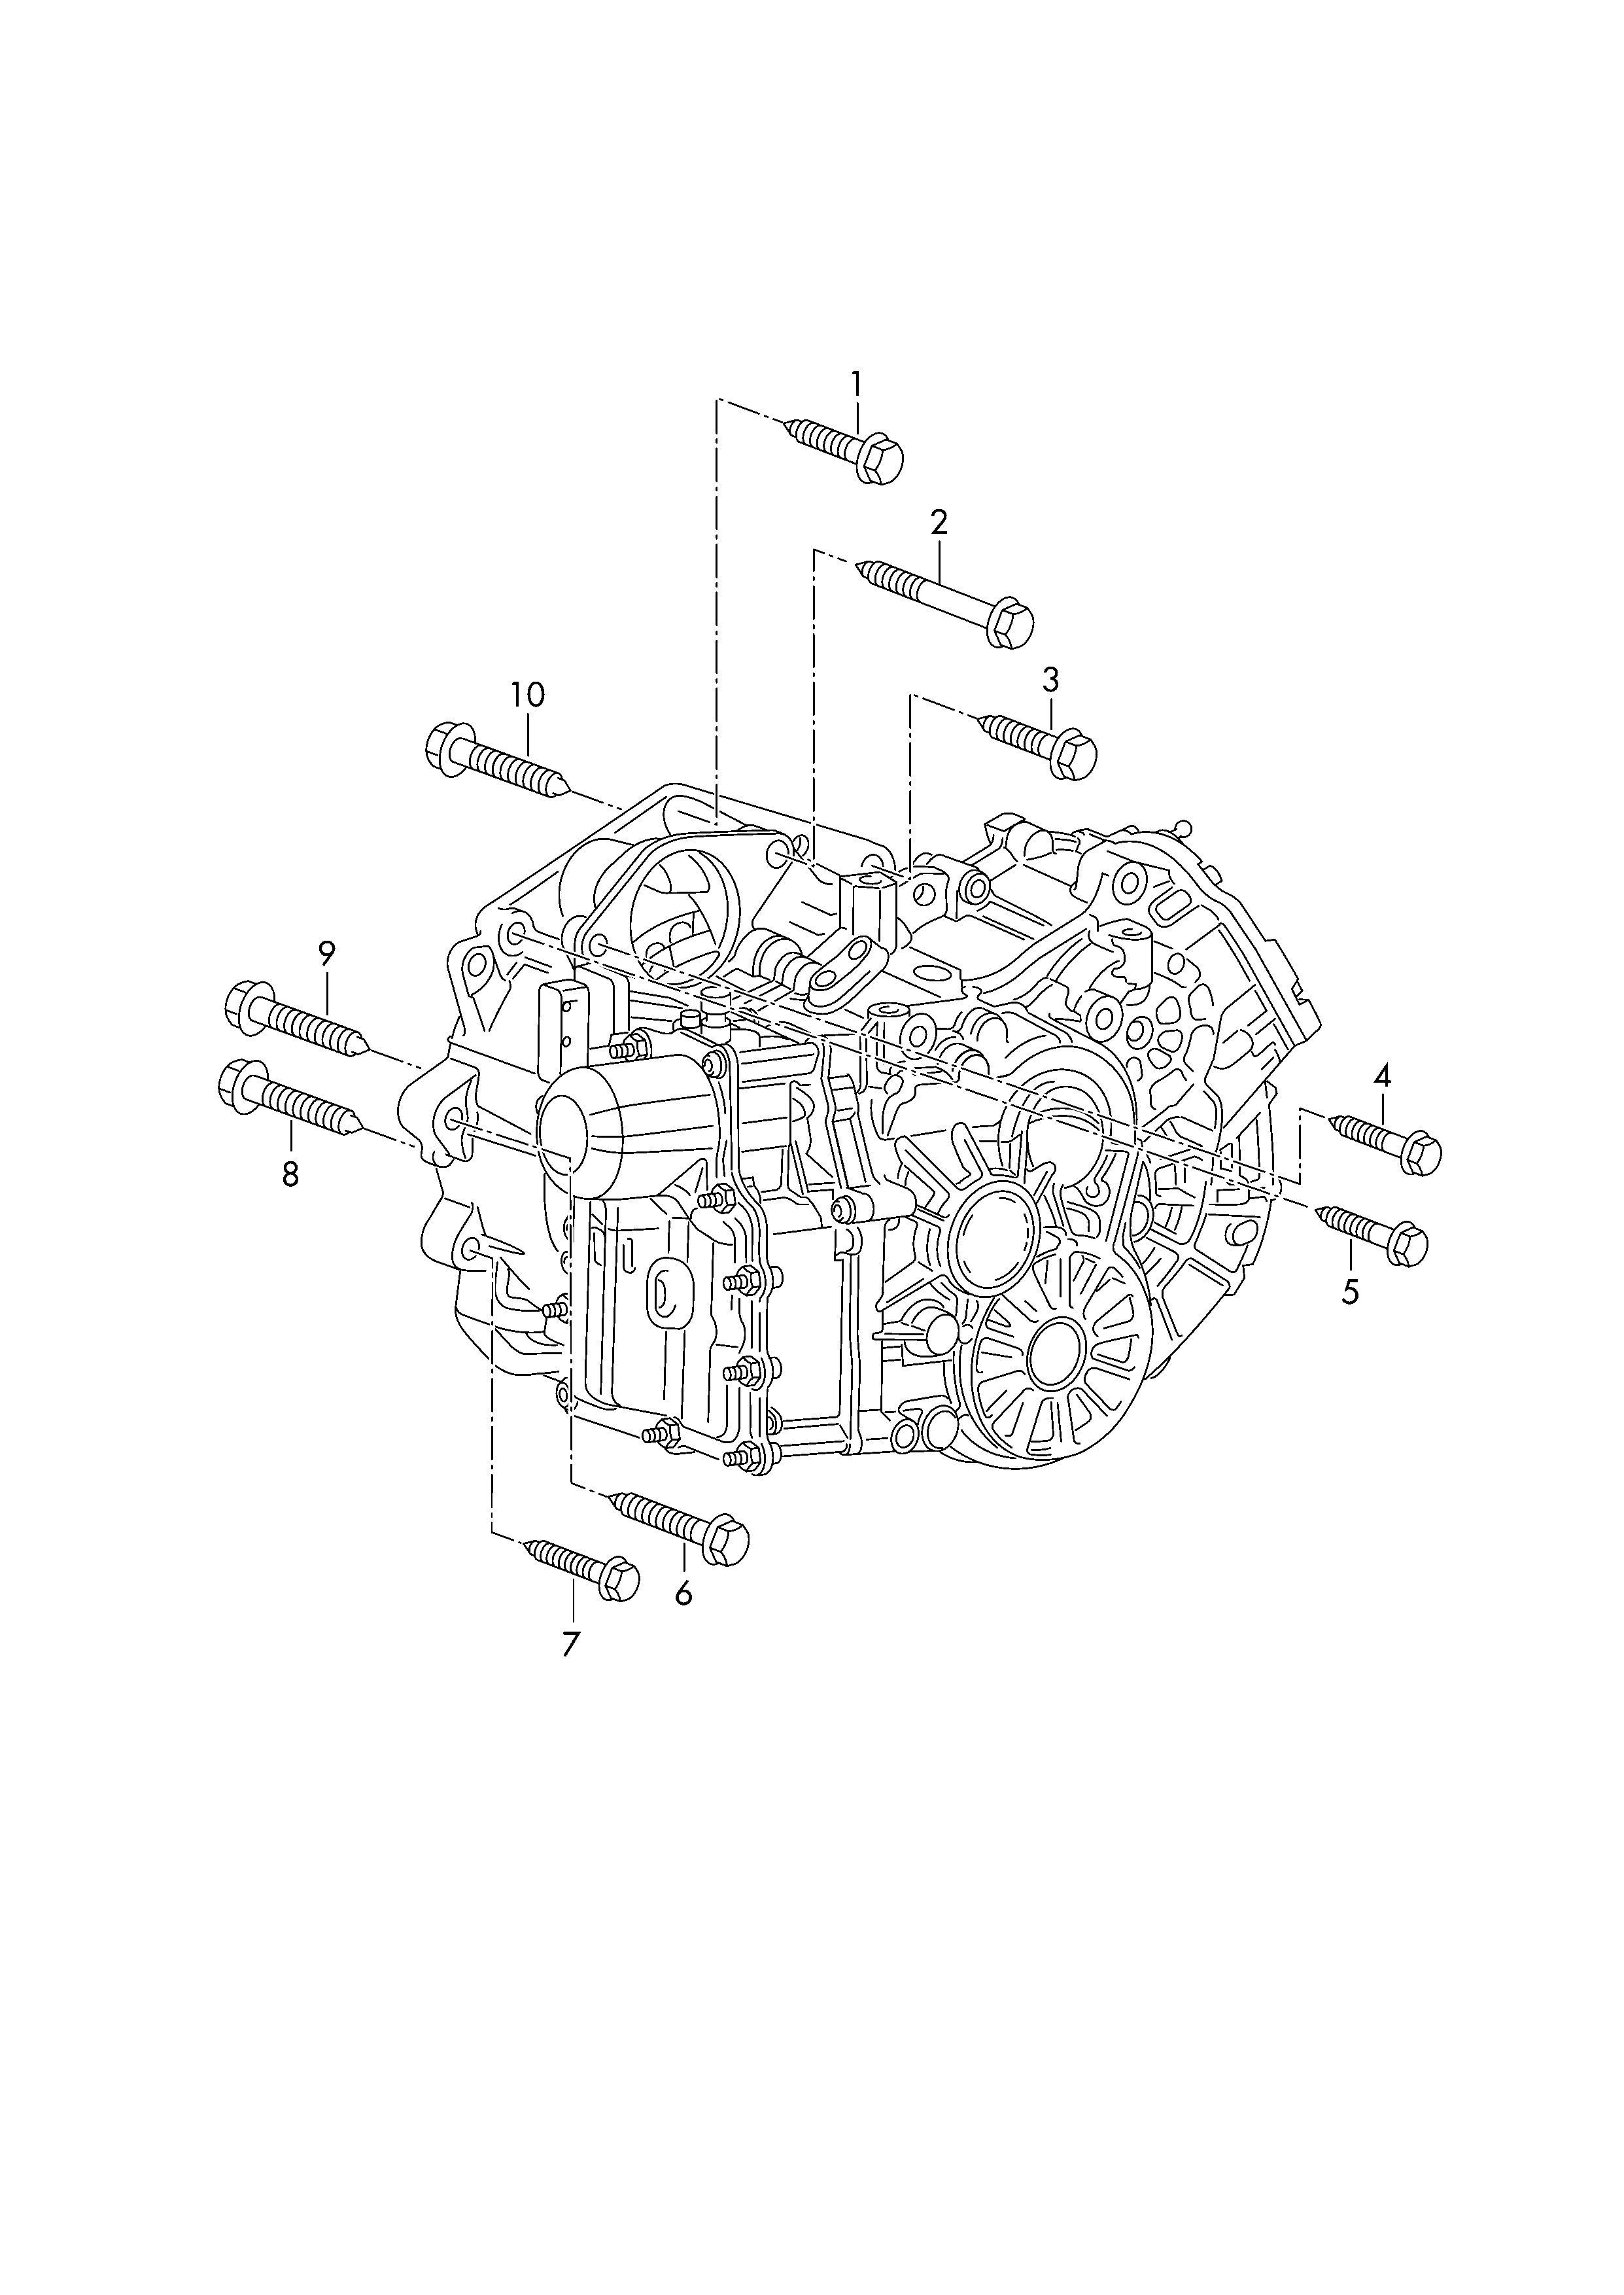 mounting parts for engine and<br>transmissionFor 7-speed dual clutch<br>gearbox  - Jetta - je